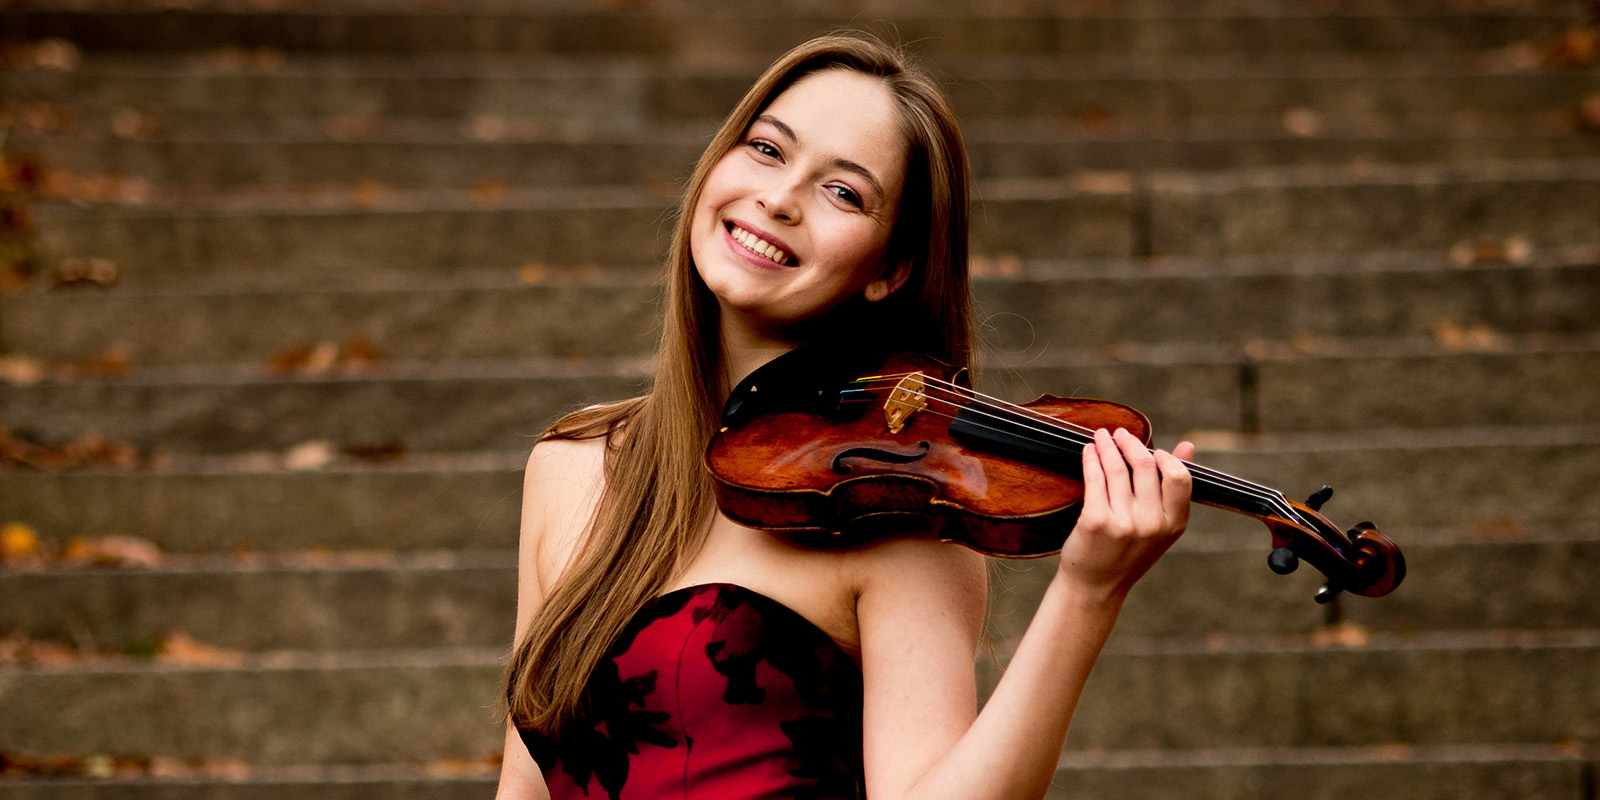 A woman with long brown hair wears a red and black dress and holds a violin on her shoulder.